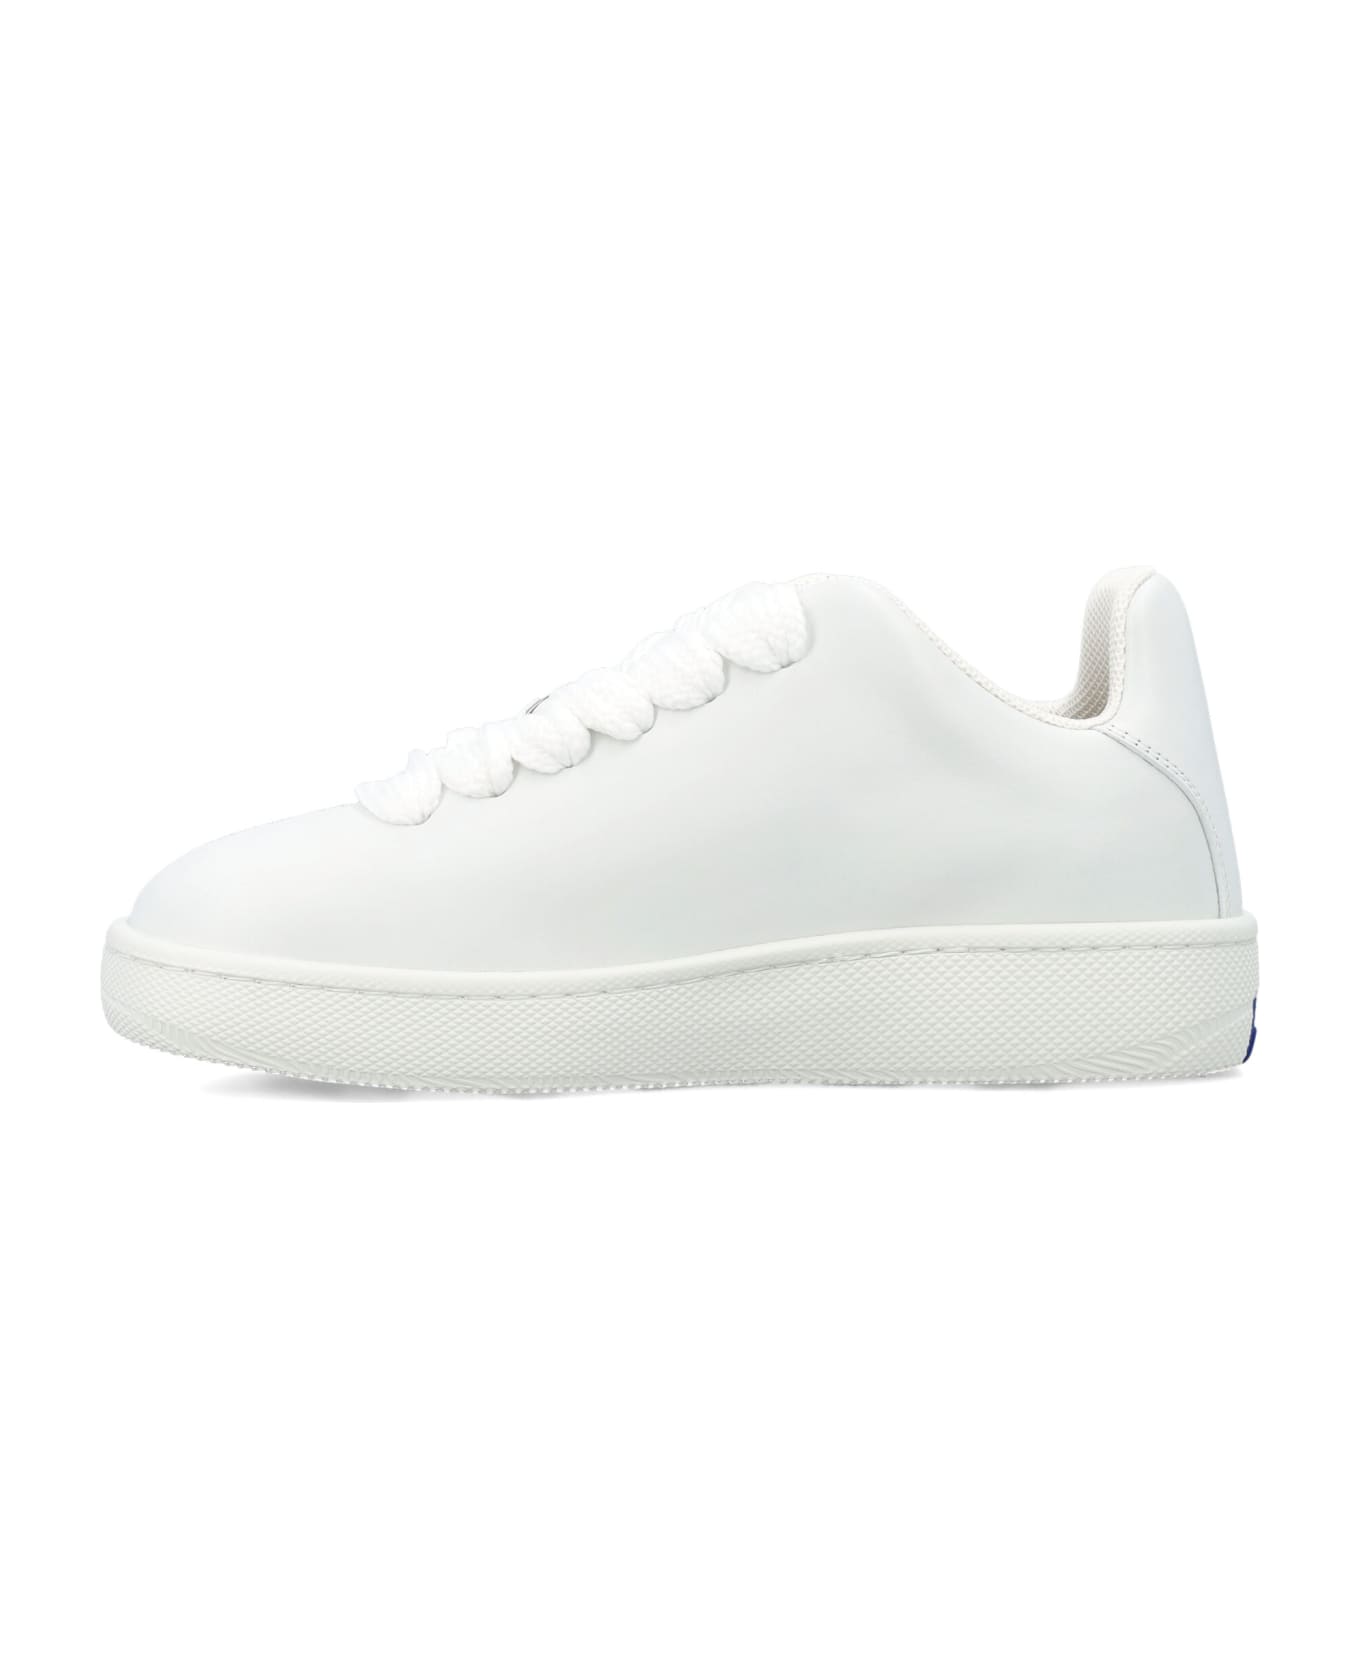 Burberry London Leather Box Sneakers - WHITE スニーカー